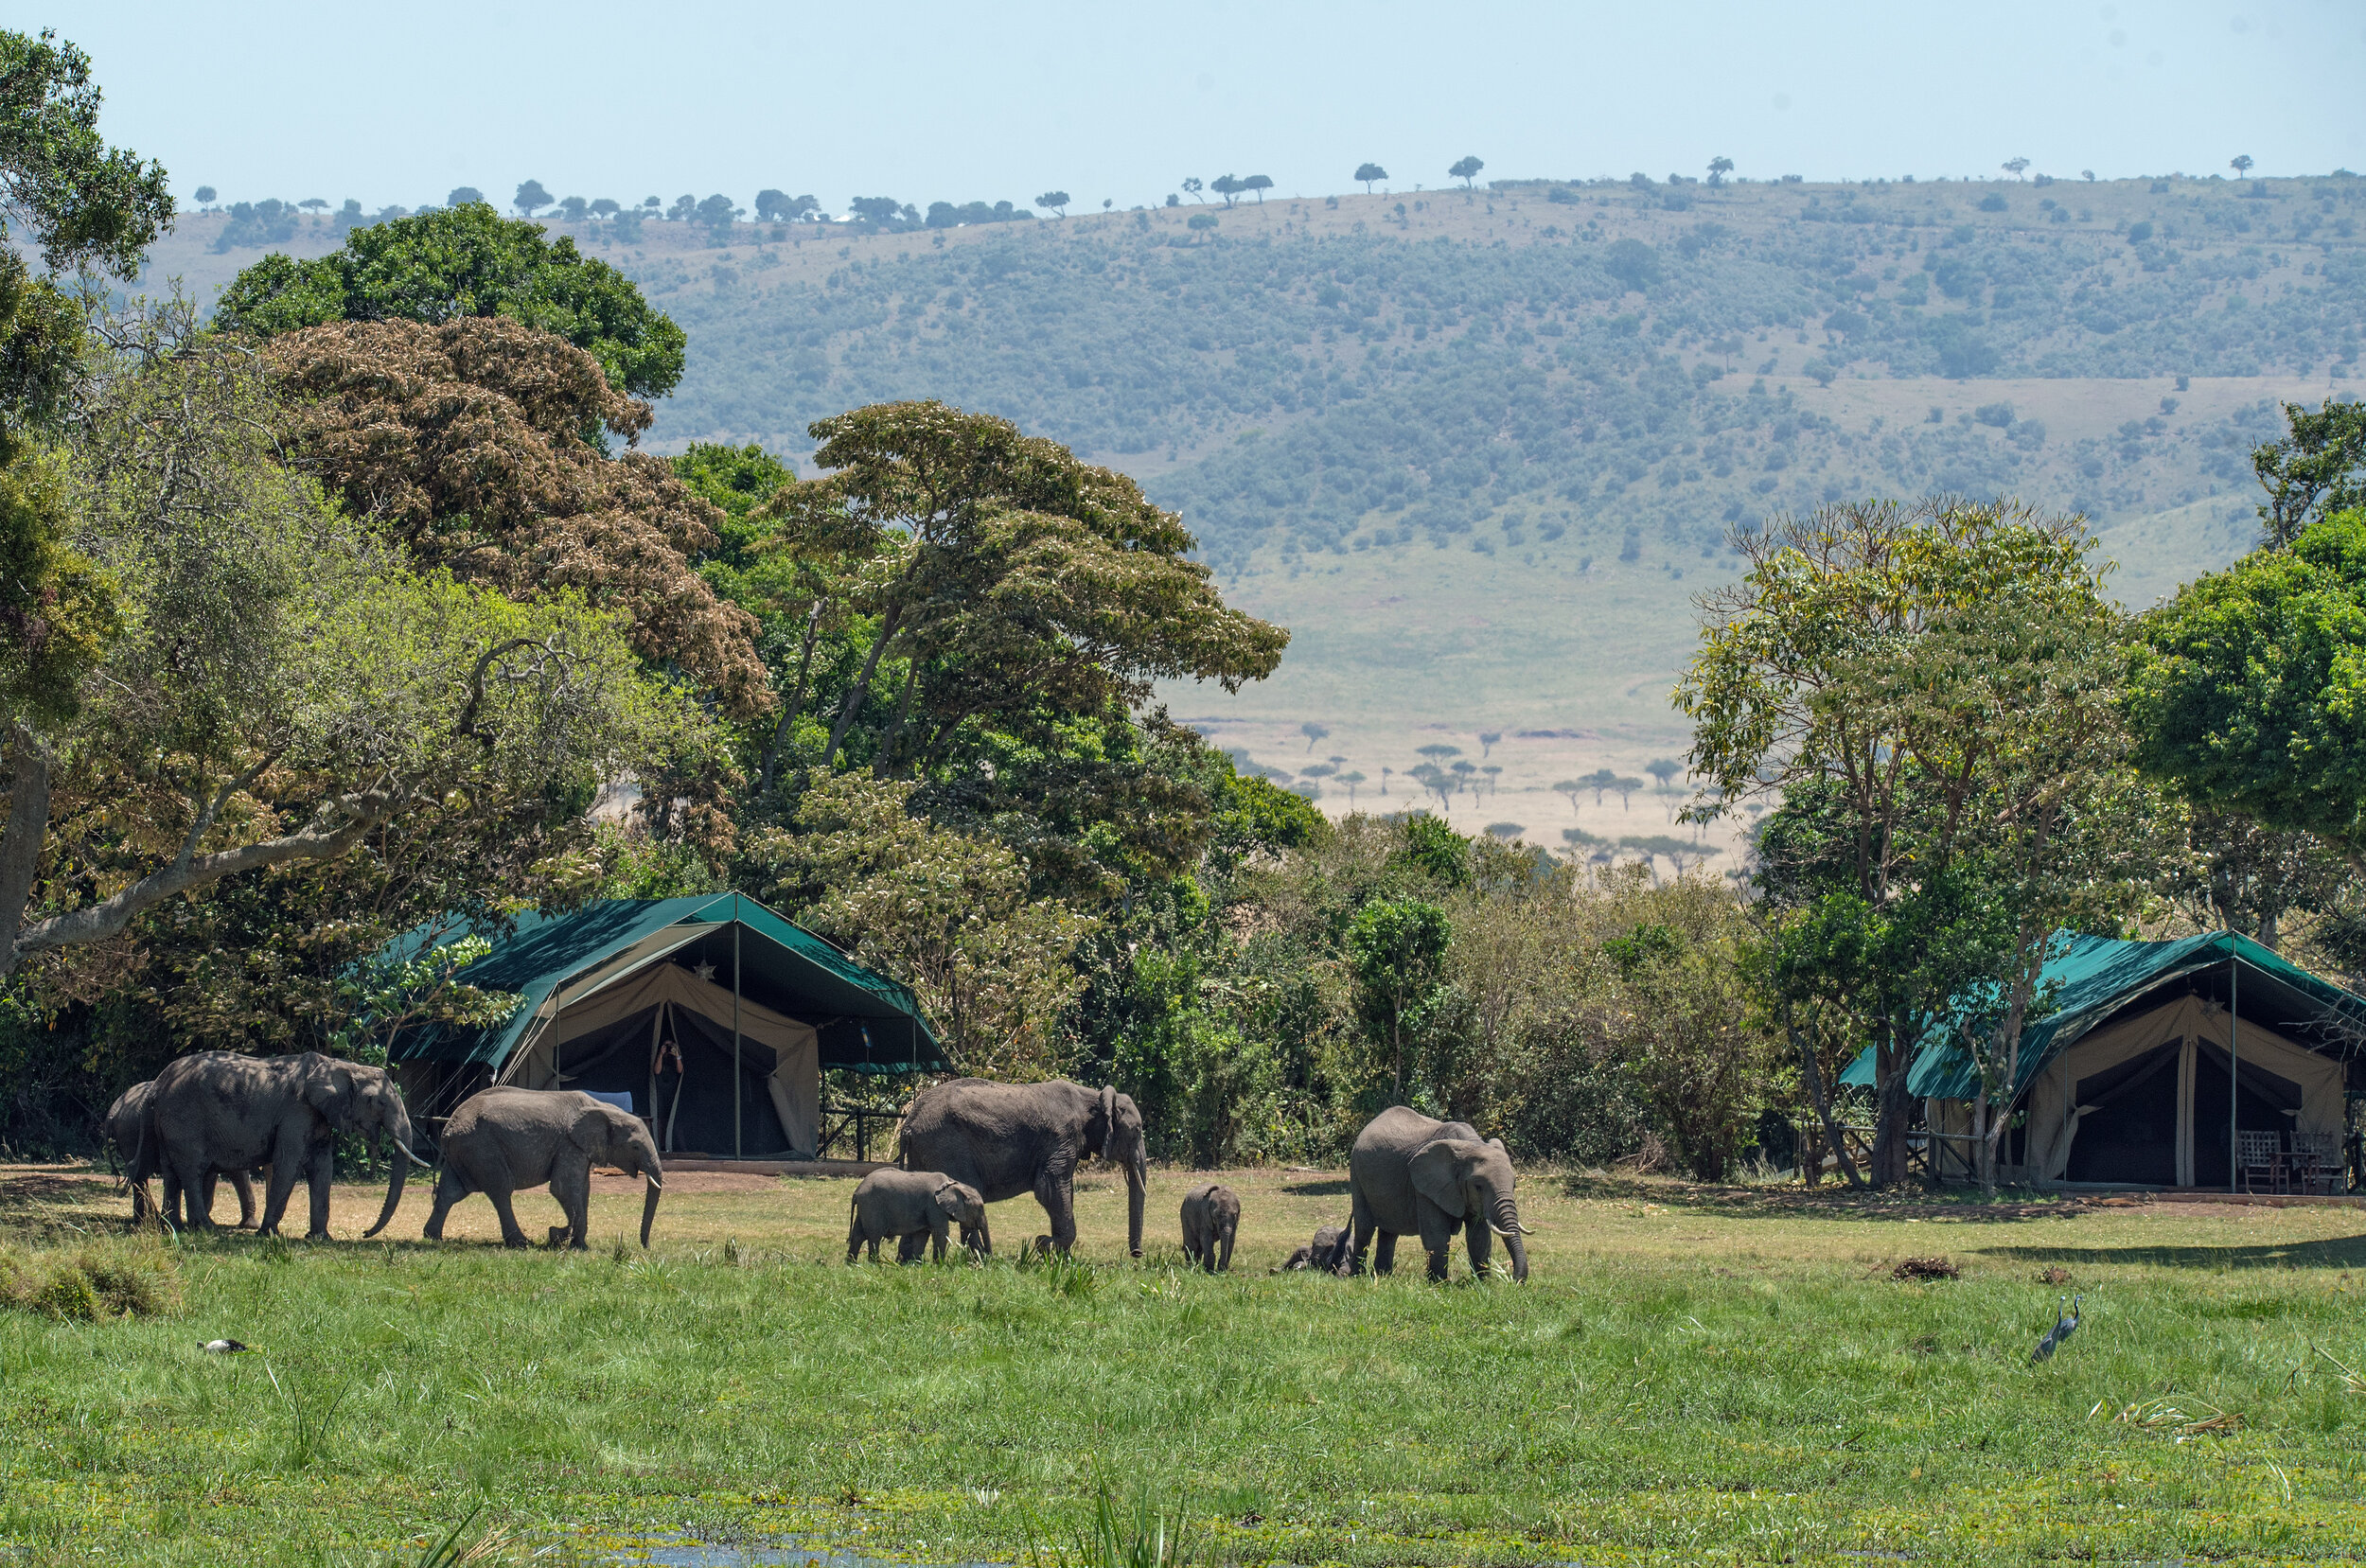 Elephants in front of safari camp